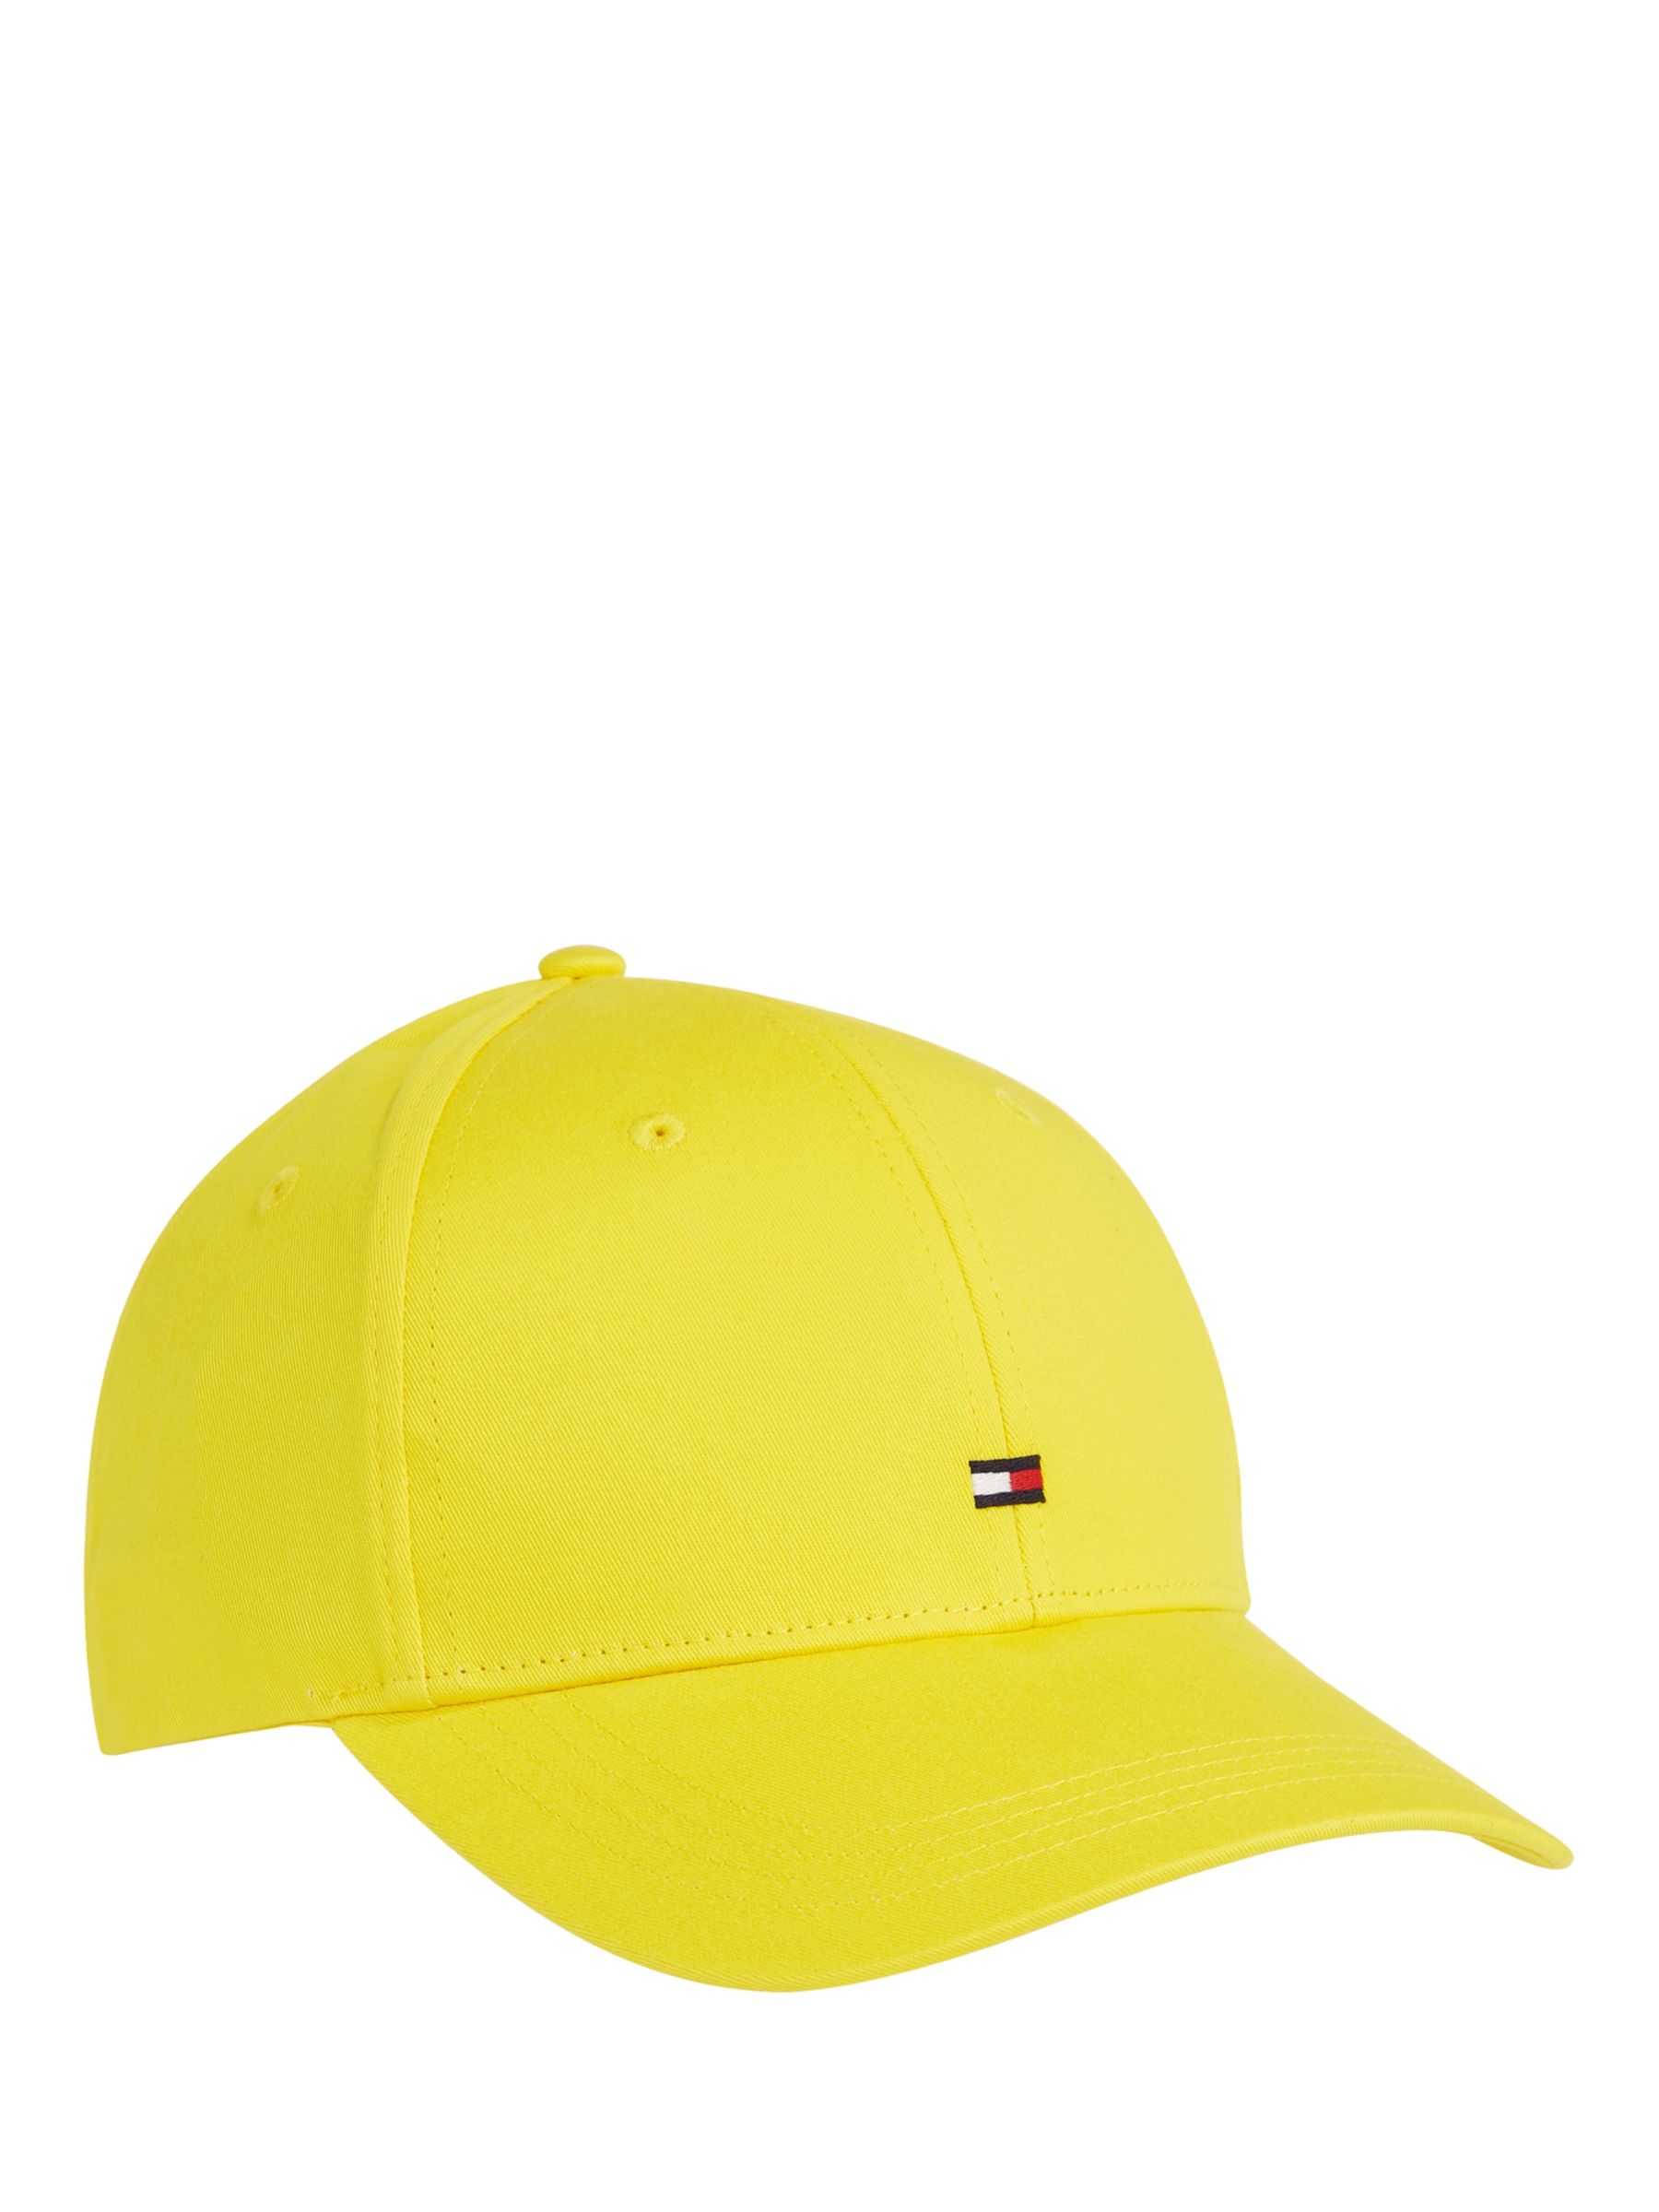 Buy Tommy Hilfiger Logo Embroidered Organic Cotton Cap Online at johnlewis.com